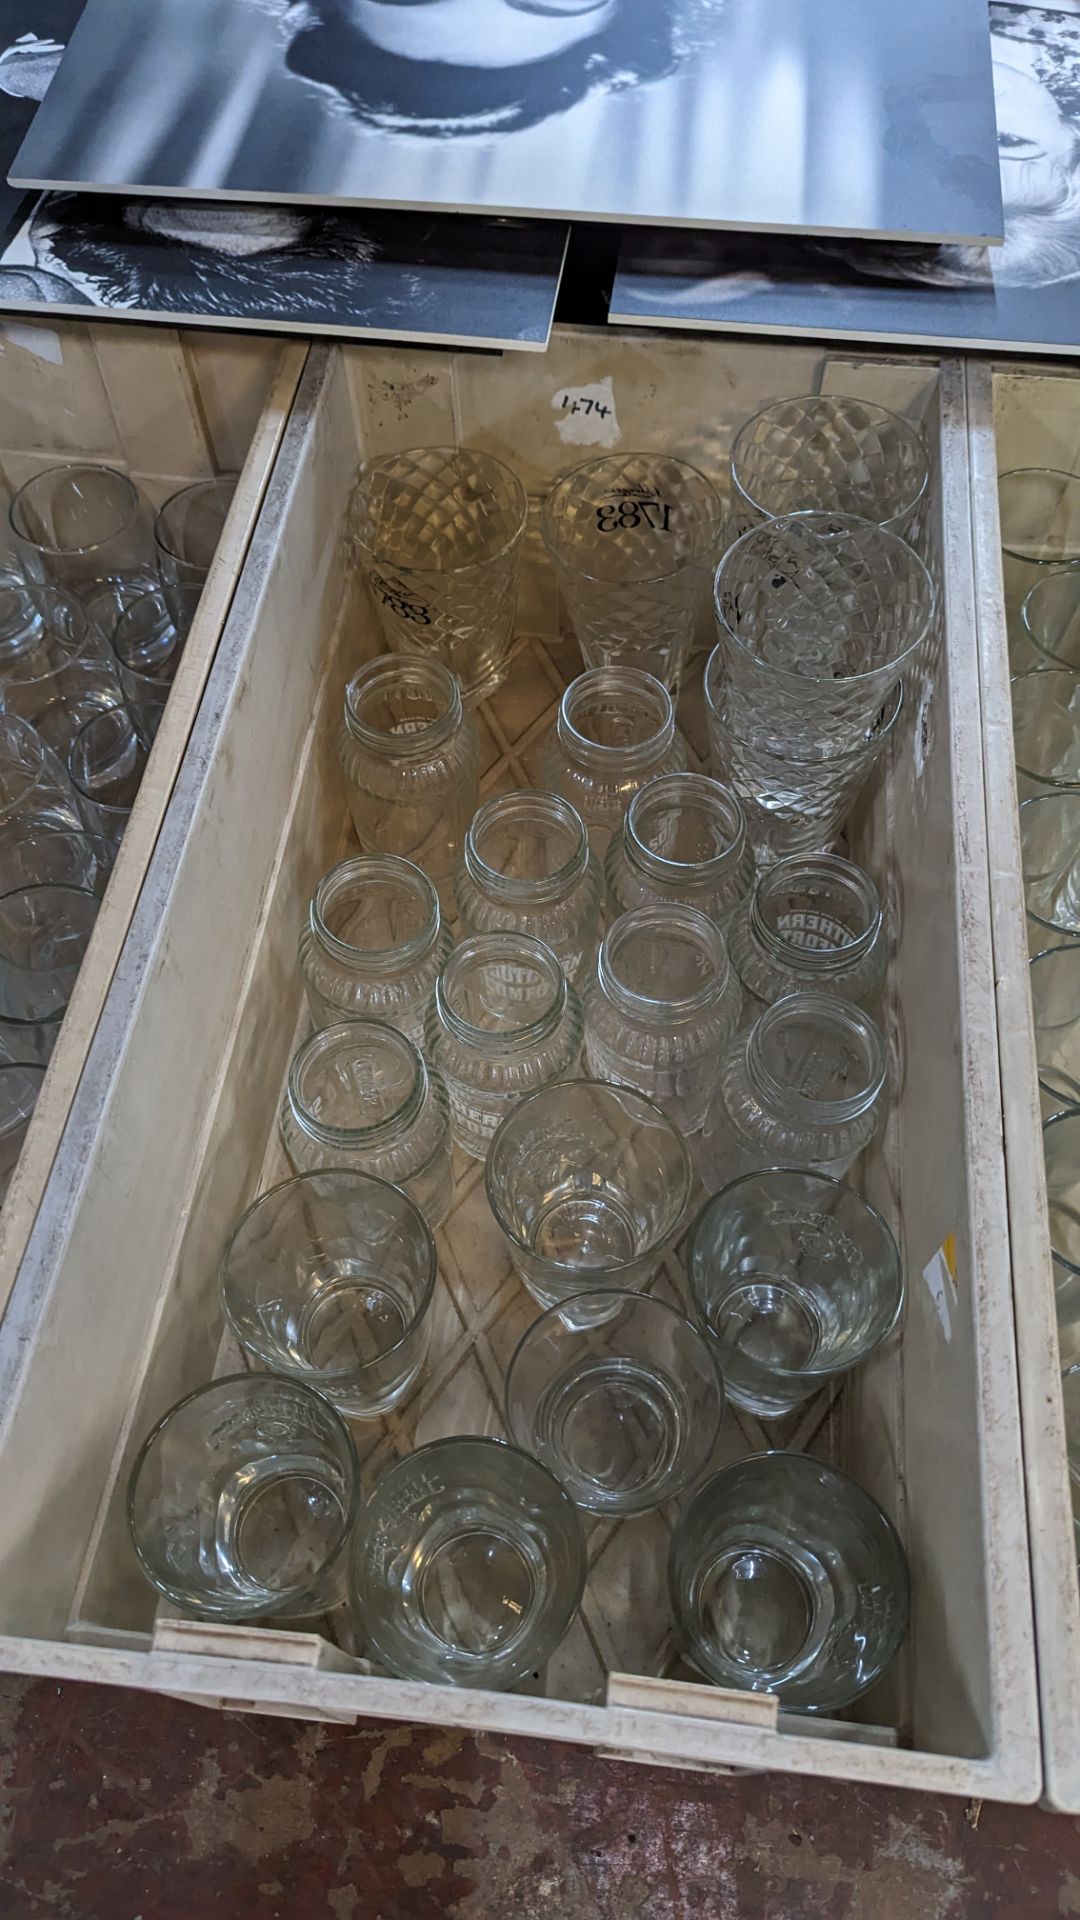 The contents of 4 crates of assorted tumblers, jars, brandy snifters, wine glasses and other glasswa - Image 4 of 6